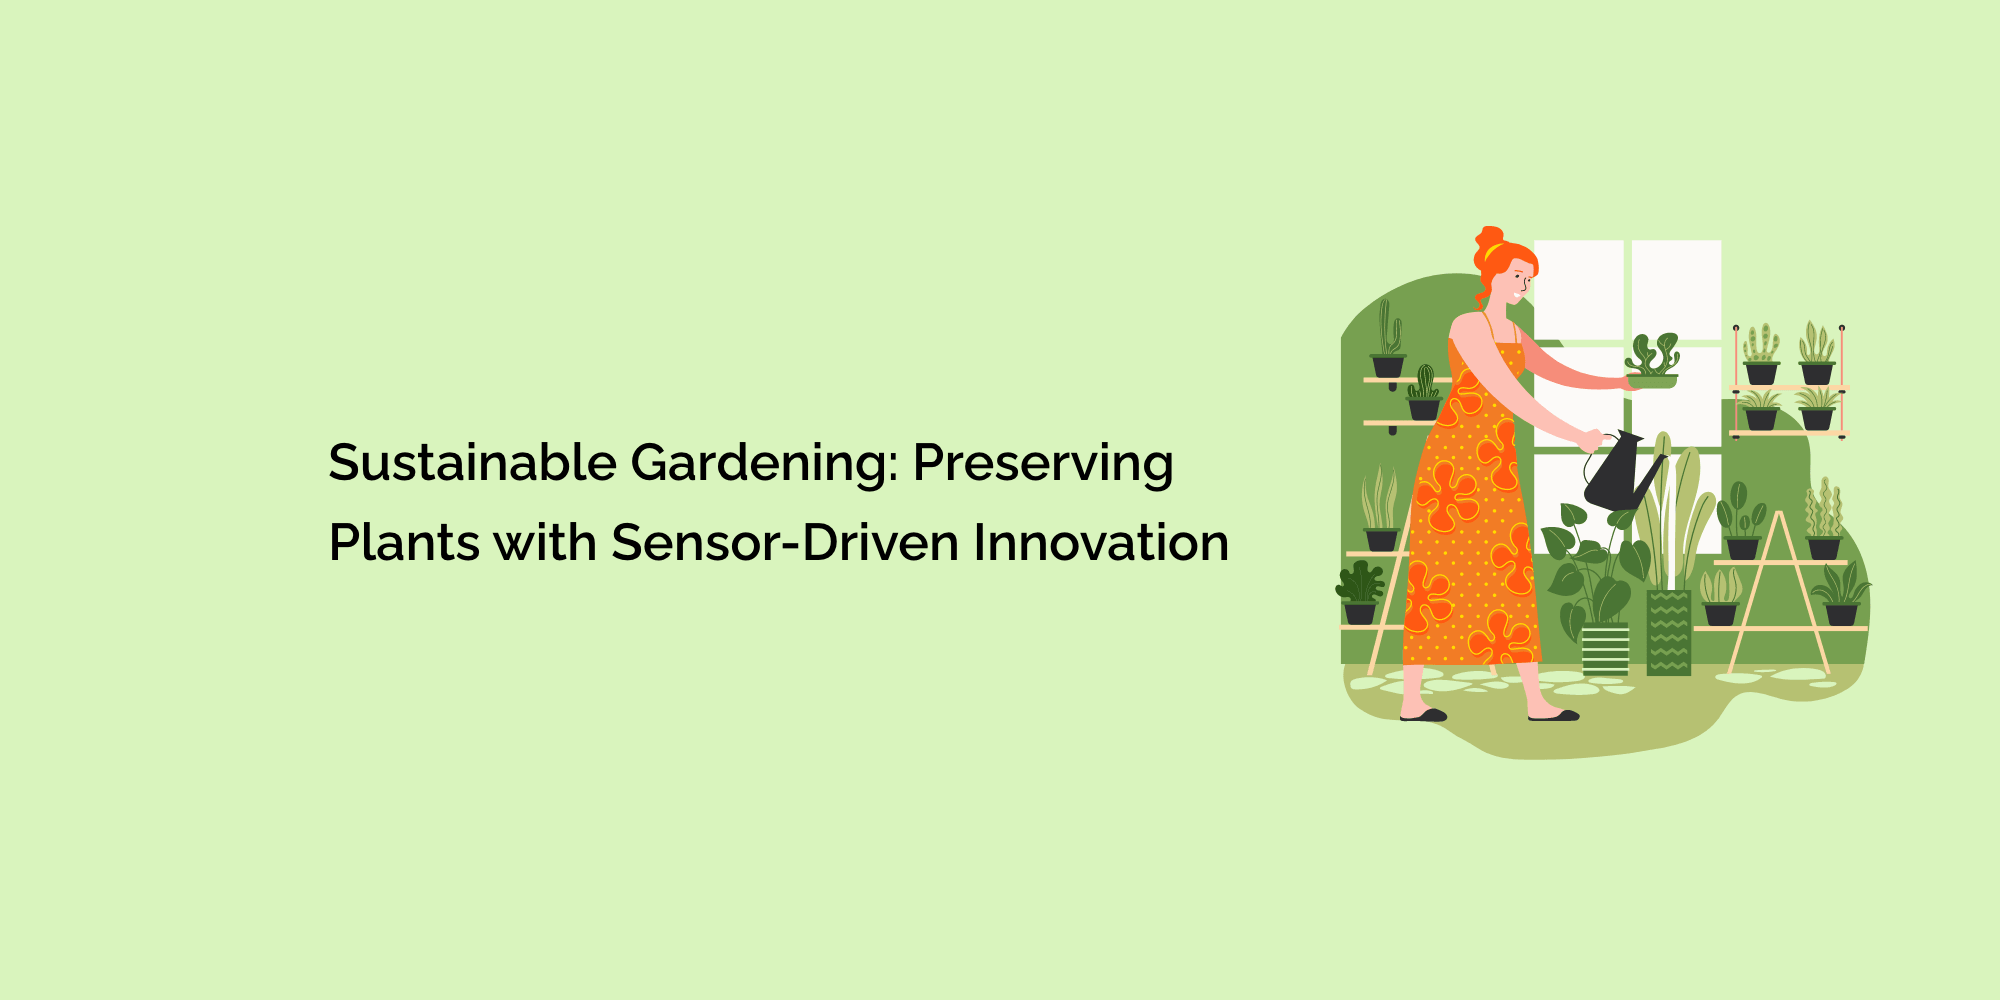 Sustainable Gardening: Preserving Plants with Sensor-Driven Innovation ...